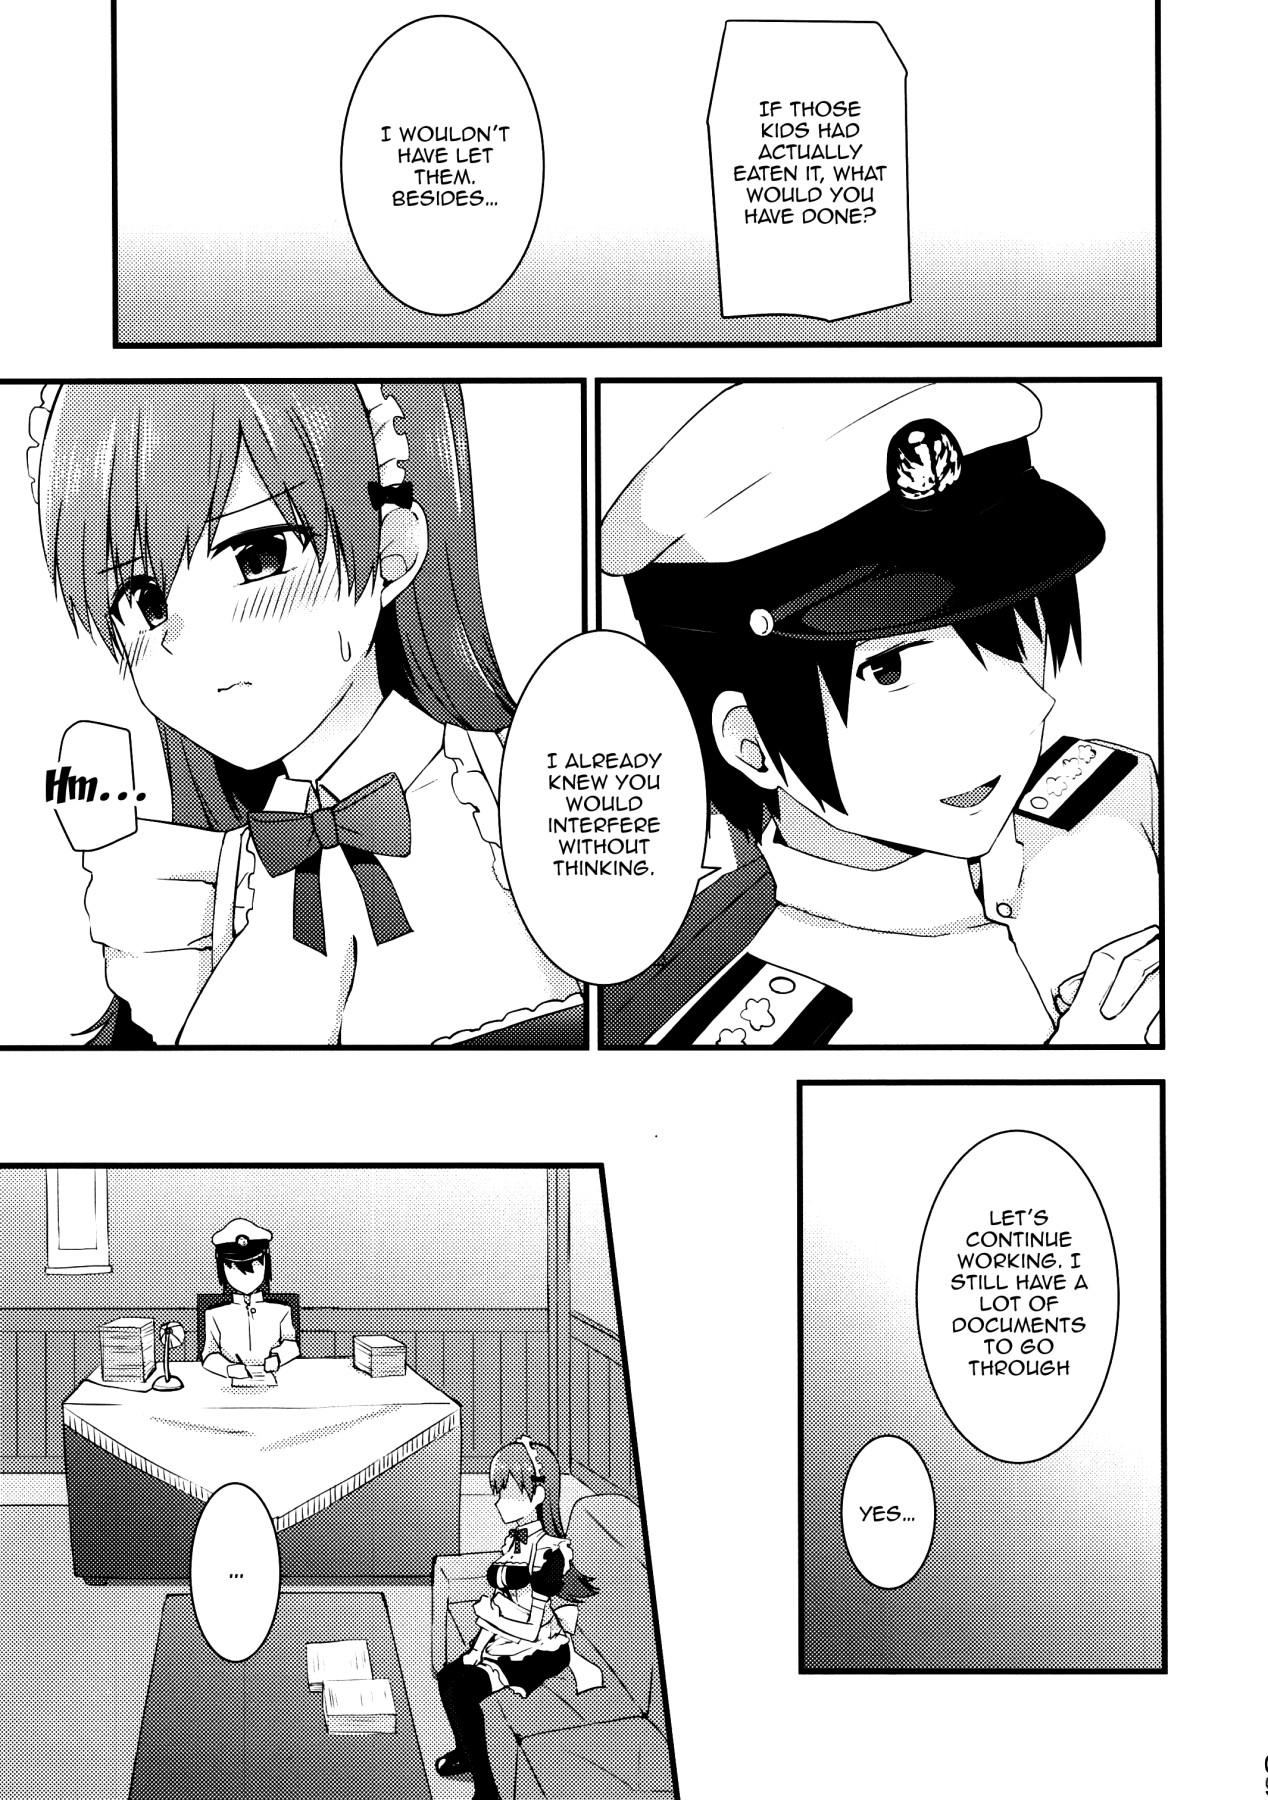 Leaked Ooi! Maid Fuku o Kite miyou! | Ooi! Try On These Maid Clothes! - Kantai collection Big Pussy - Page 10